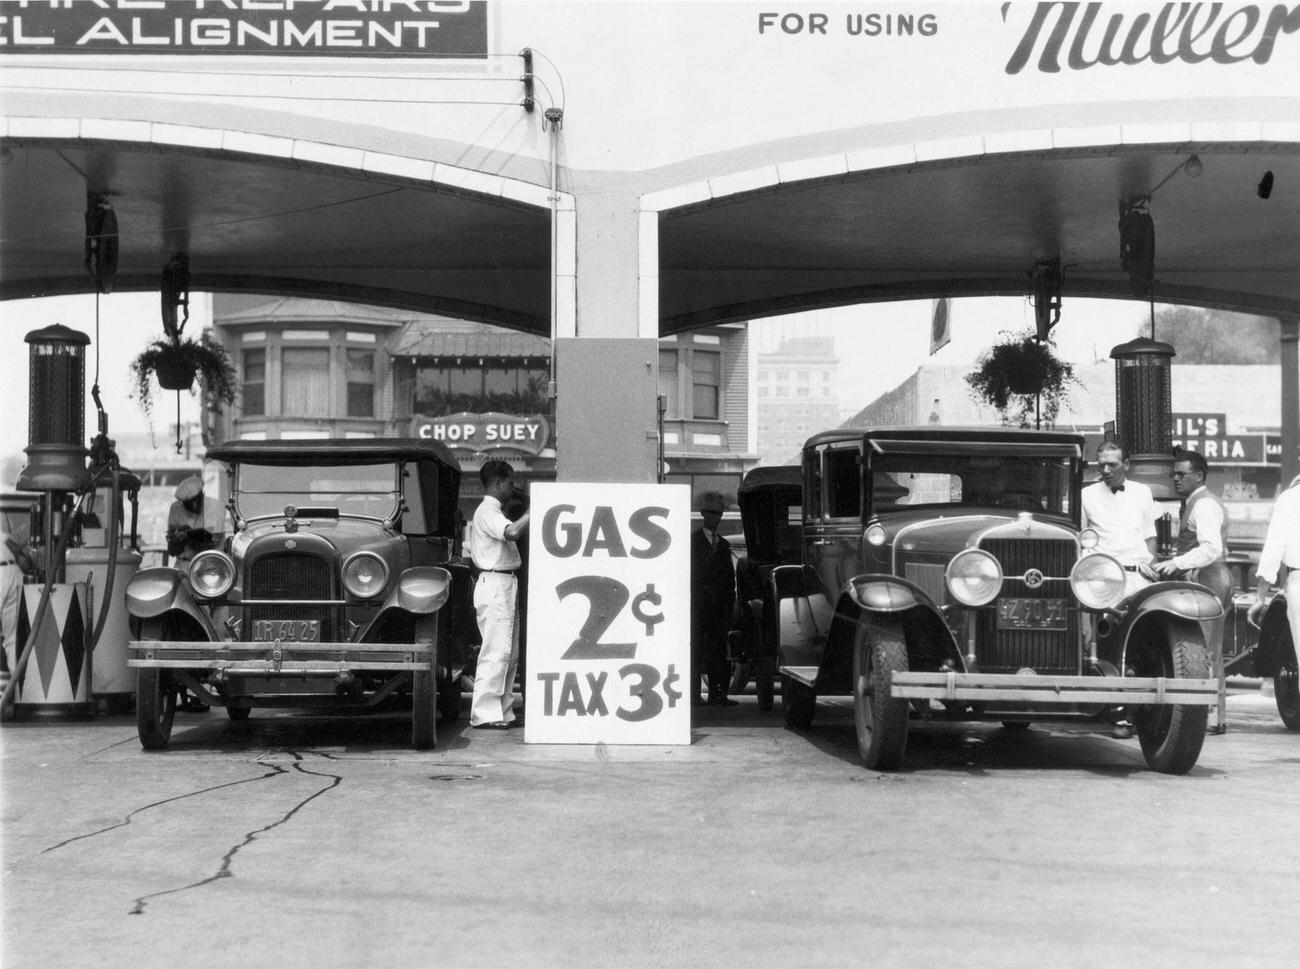 Hollywood Gas Station Selling Gas for 2 Cents a Gallon